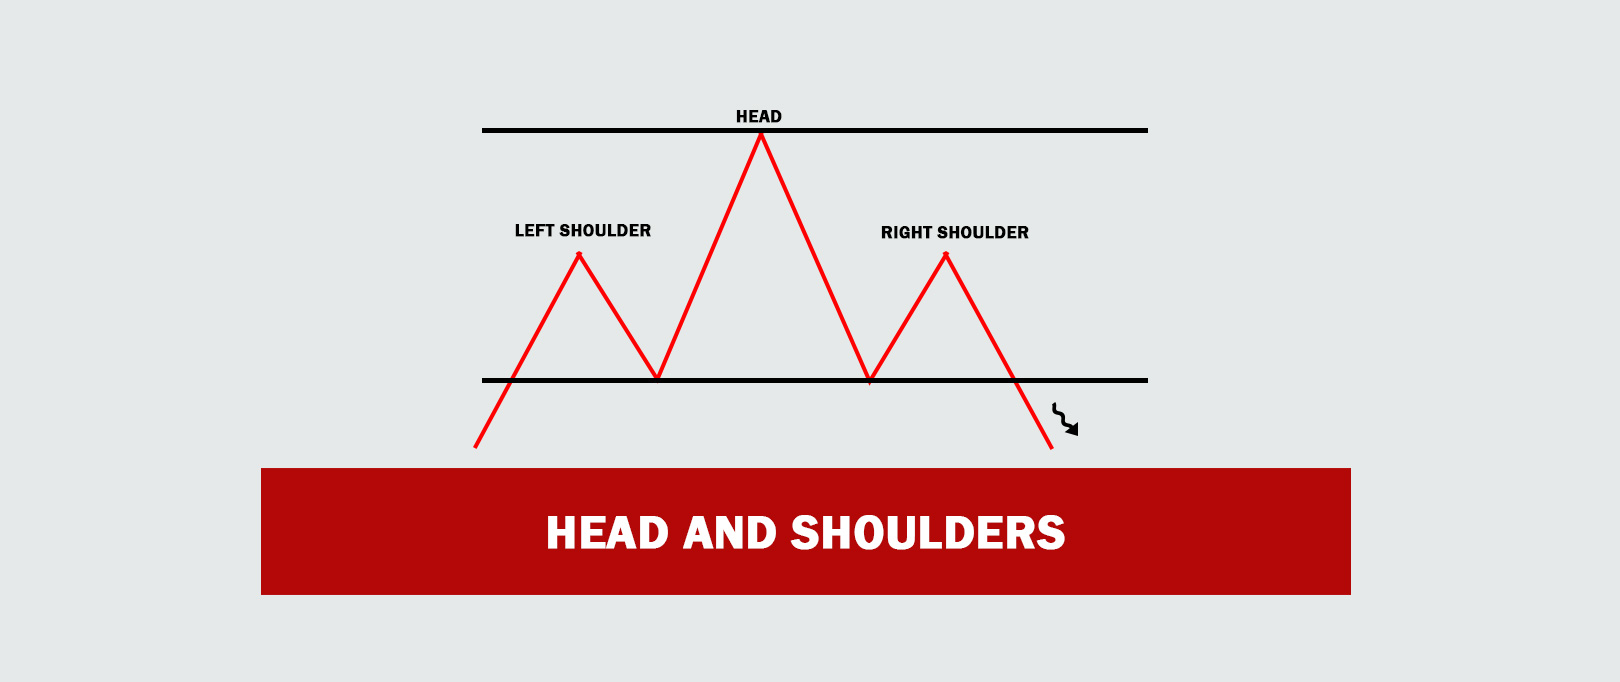 head and shoulders Forex Trading Chart Pattern Exploring Forex Trading Ideas by Prathilaba in Sri Lanka